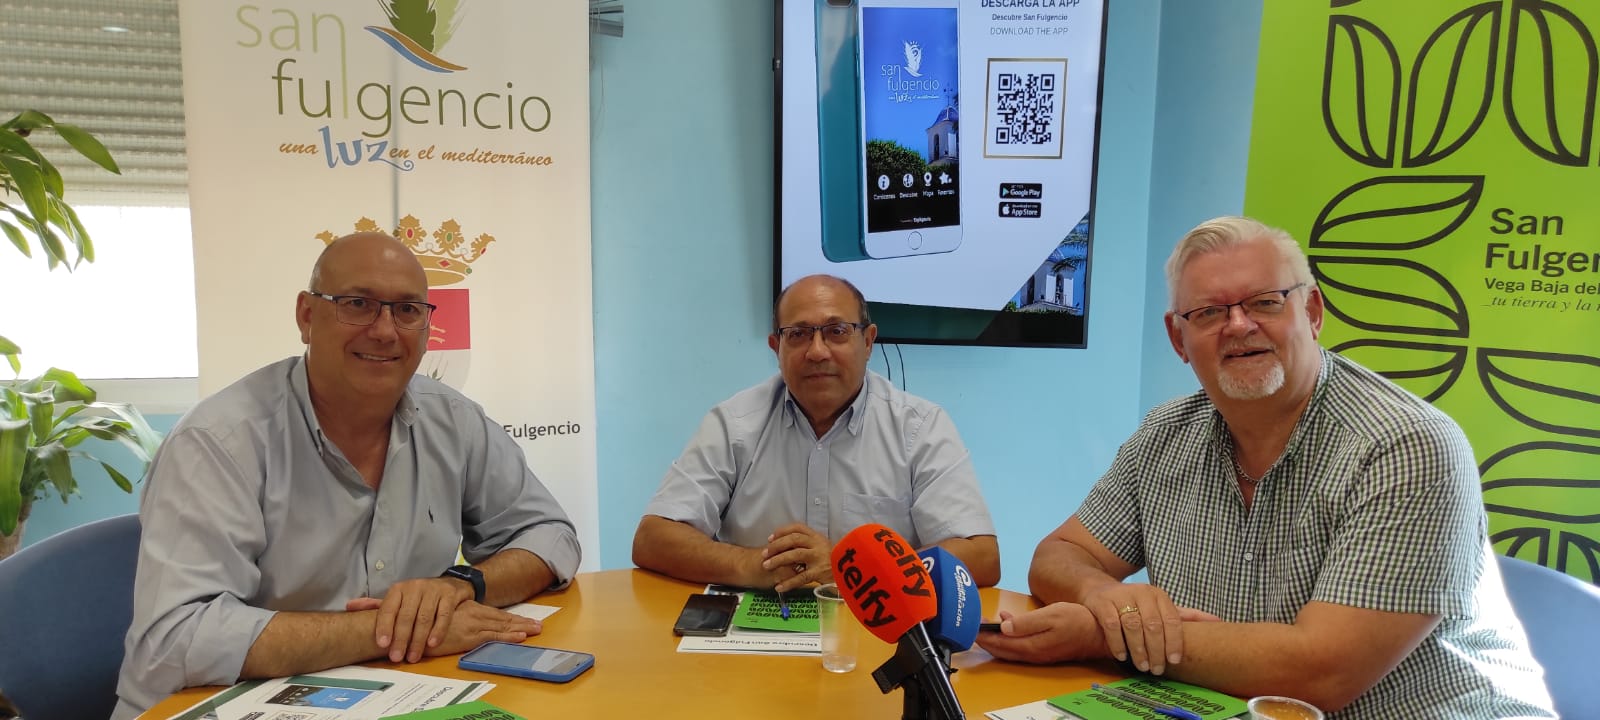 San Fulgencio presents a new mobile application for the promotion of tourism in the municipality